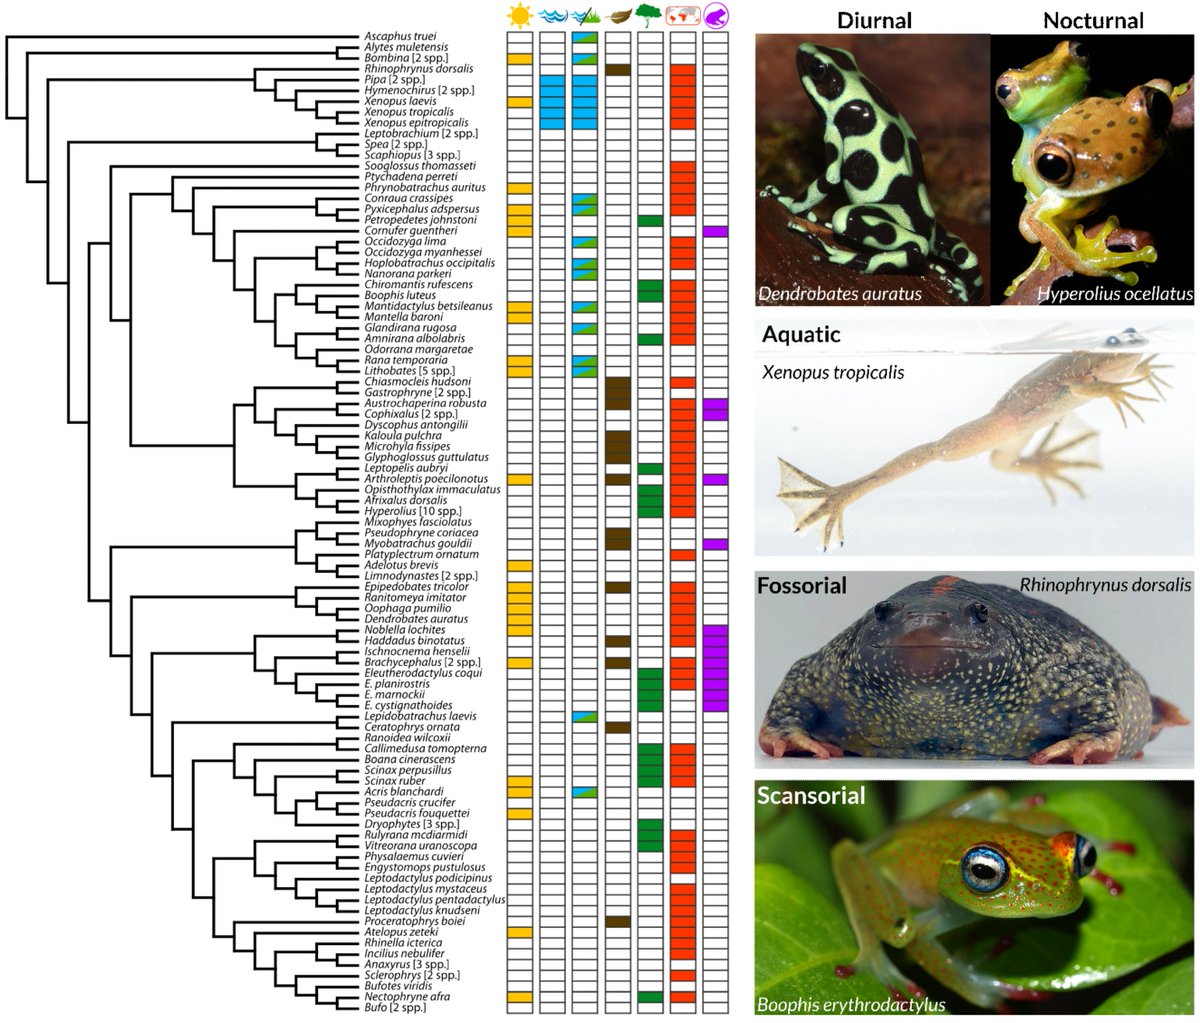 Check out our new paper in @MolBioEvol led by the awesome @rkschott who amassed data from #frogs all over the world to understand #vision #evolution. Video explainer here: bit.ly/49oyWkD paper here: tinyurl.com/5ya4mv49 @RaynaCBell @geckofujita @jeff_streicher